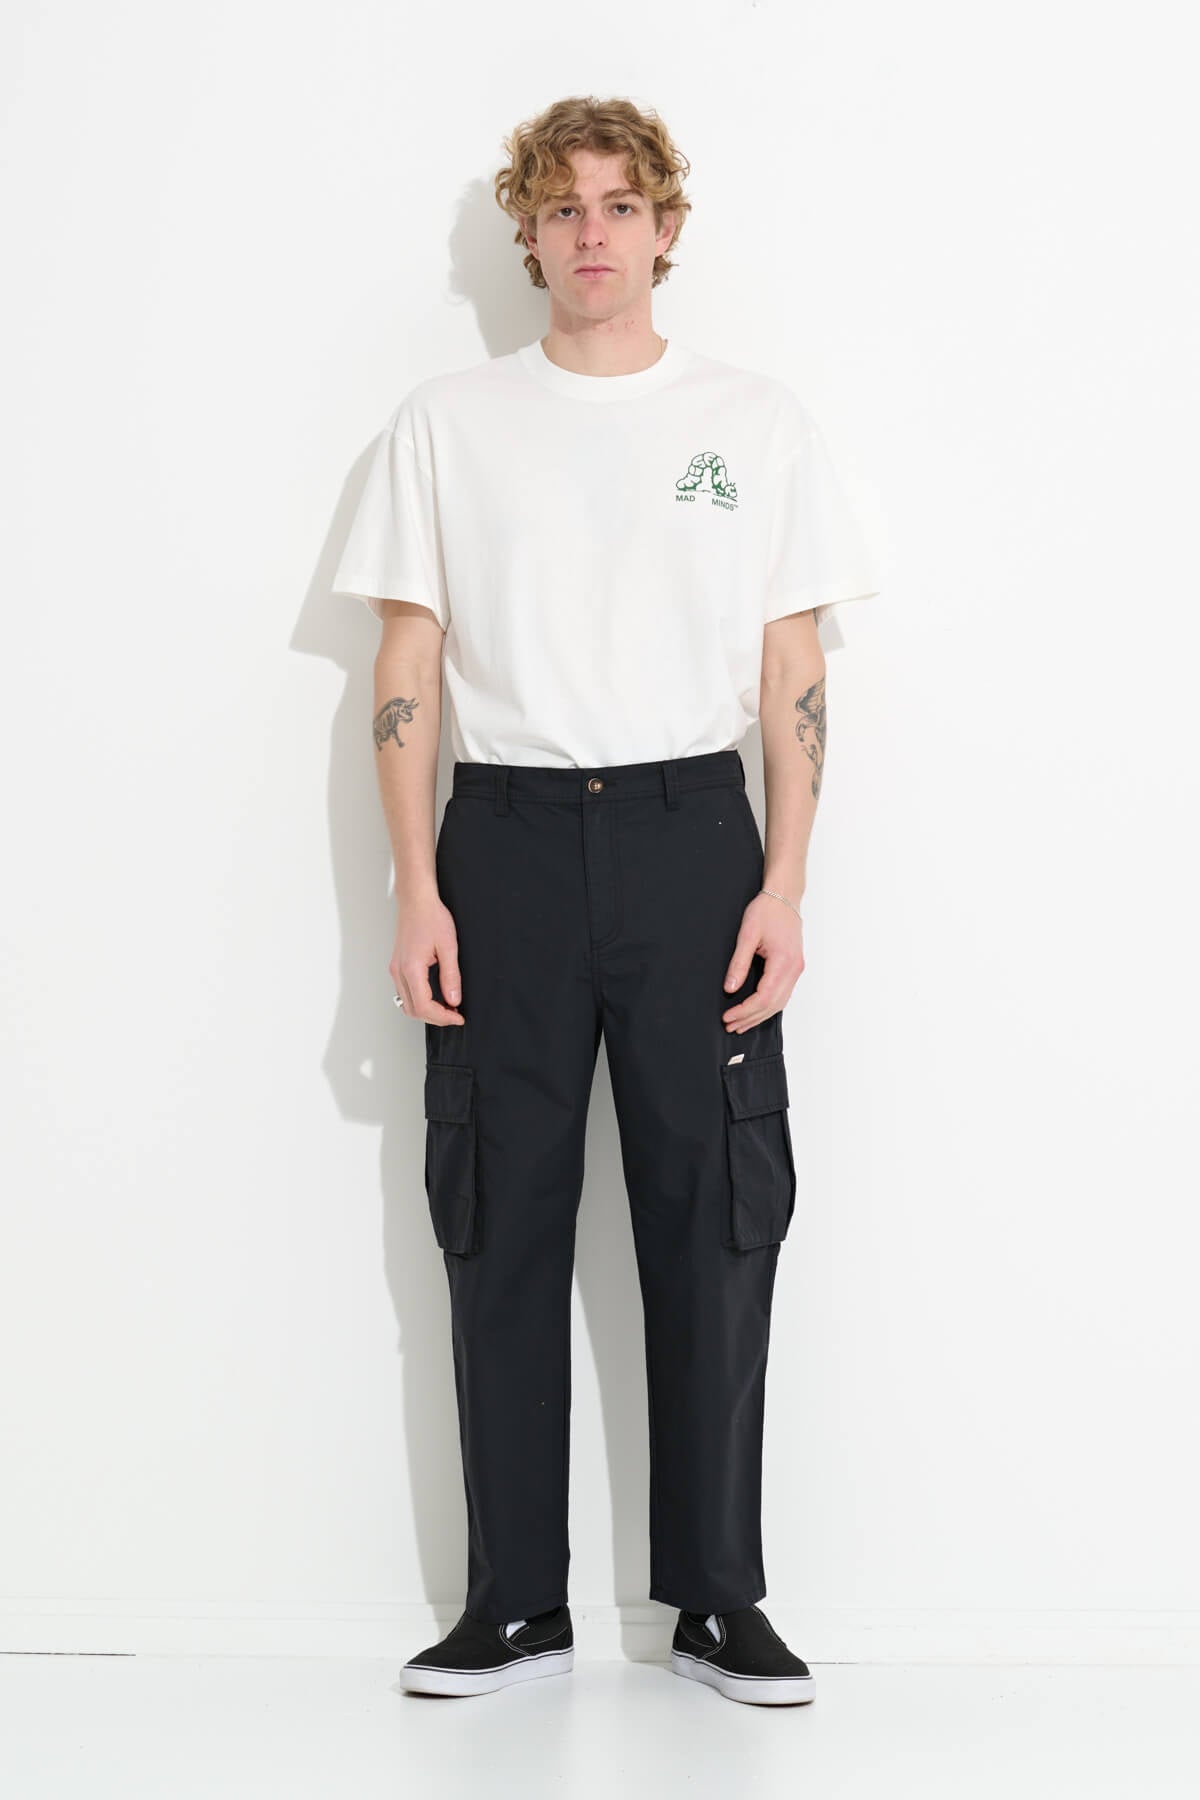 Misfit Shapes - Green Onions Cargo Pant - Black Ripstop